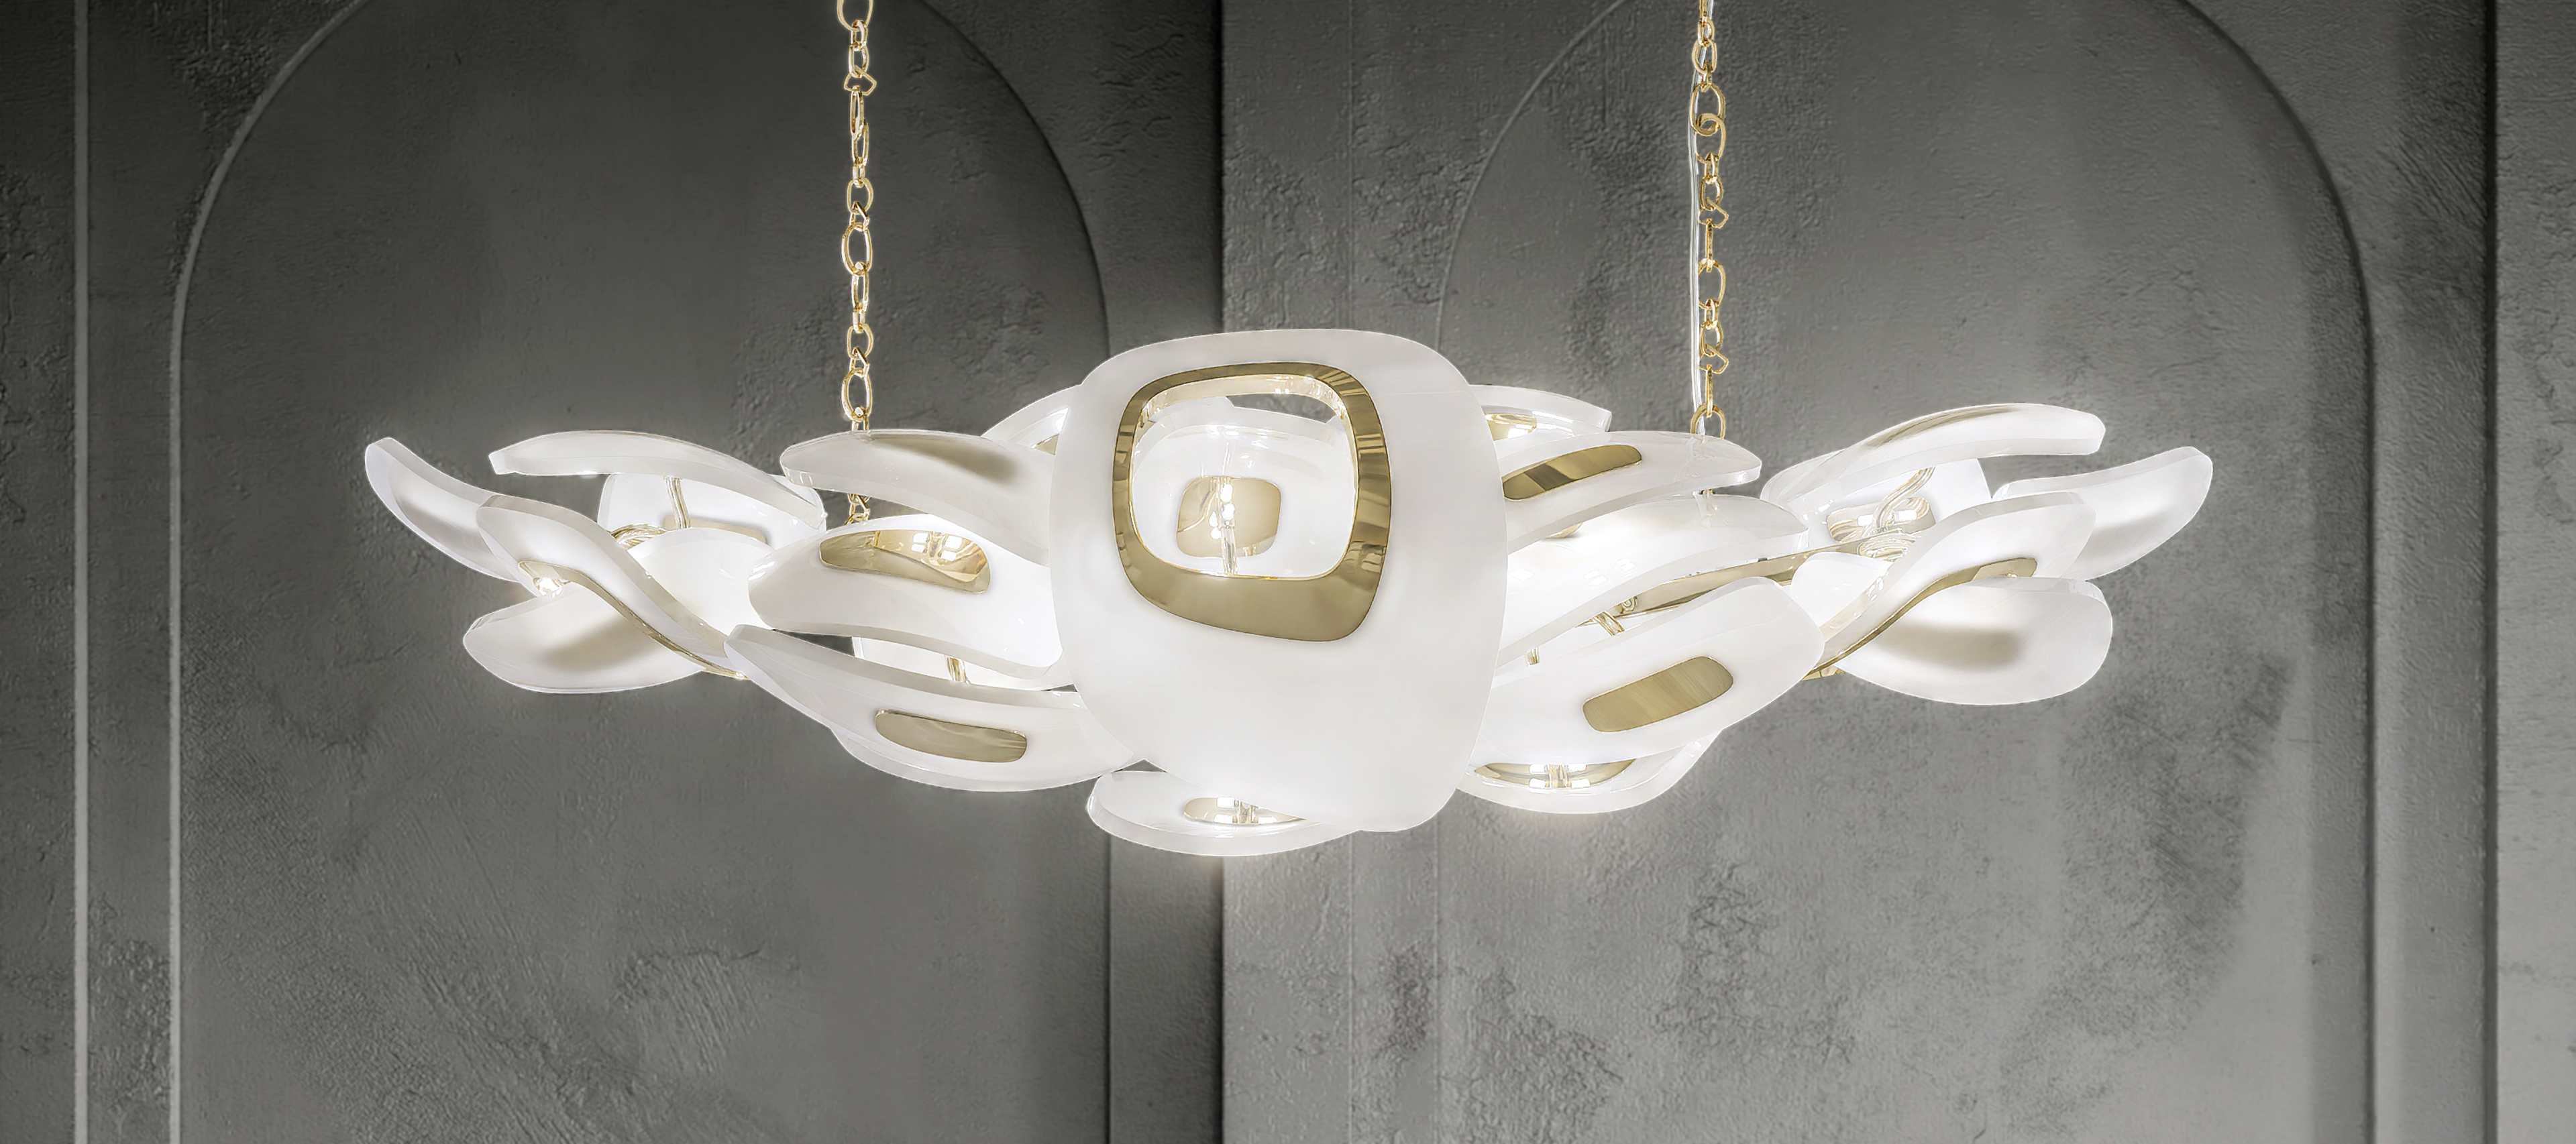 Swan Chandelier with Stainless Steel and Glass